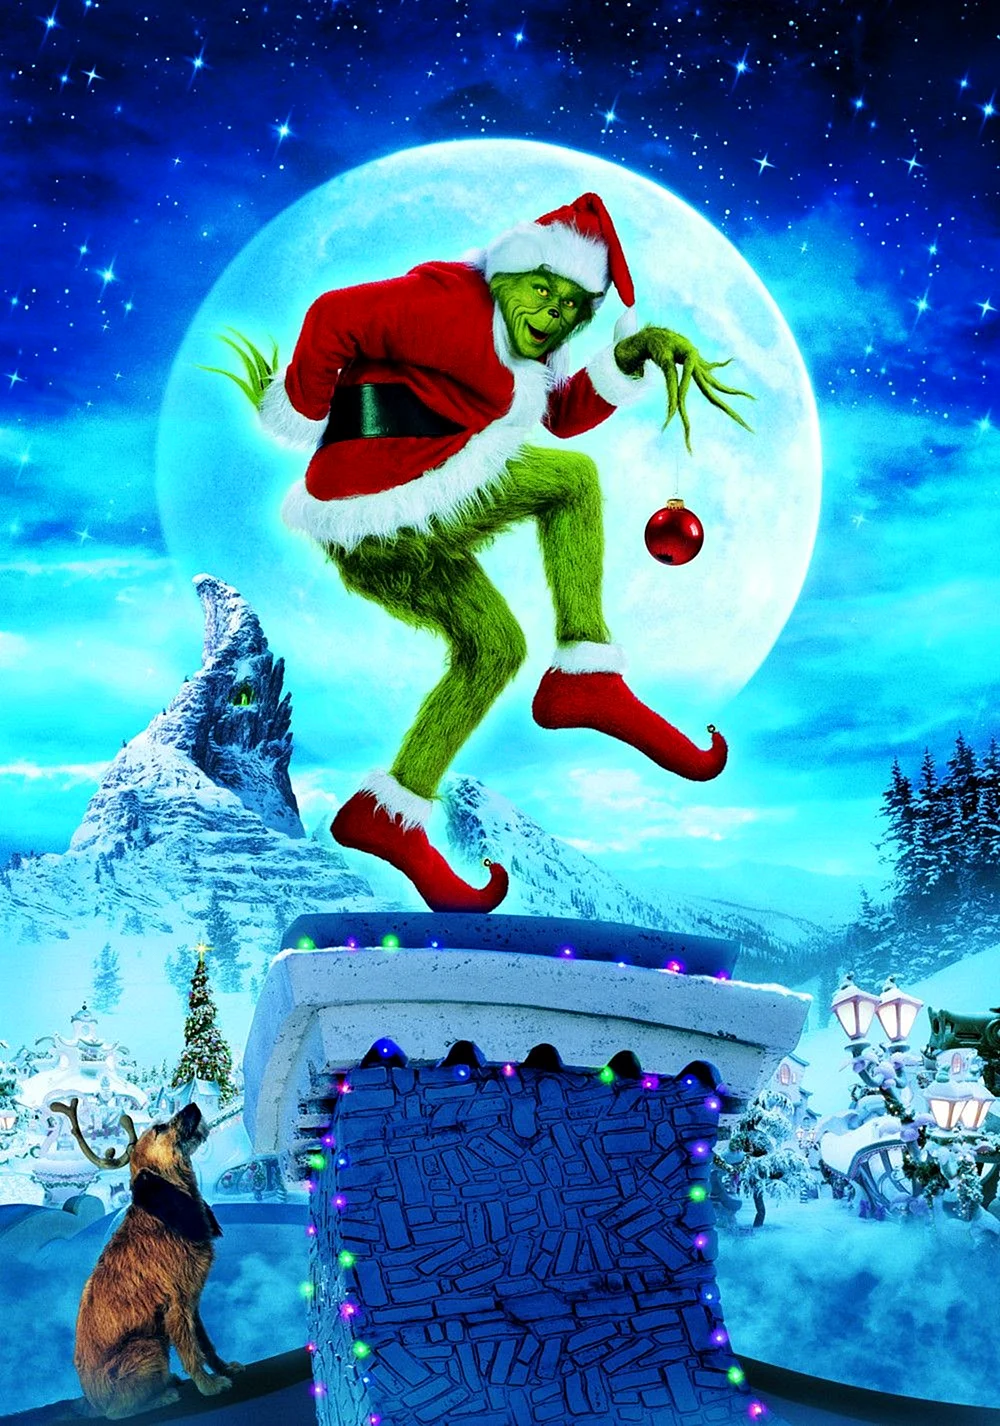 How The Grinch Stole Christmas 2000 Wallpaper For iPhone